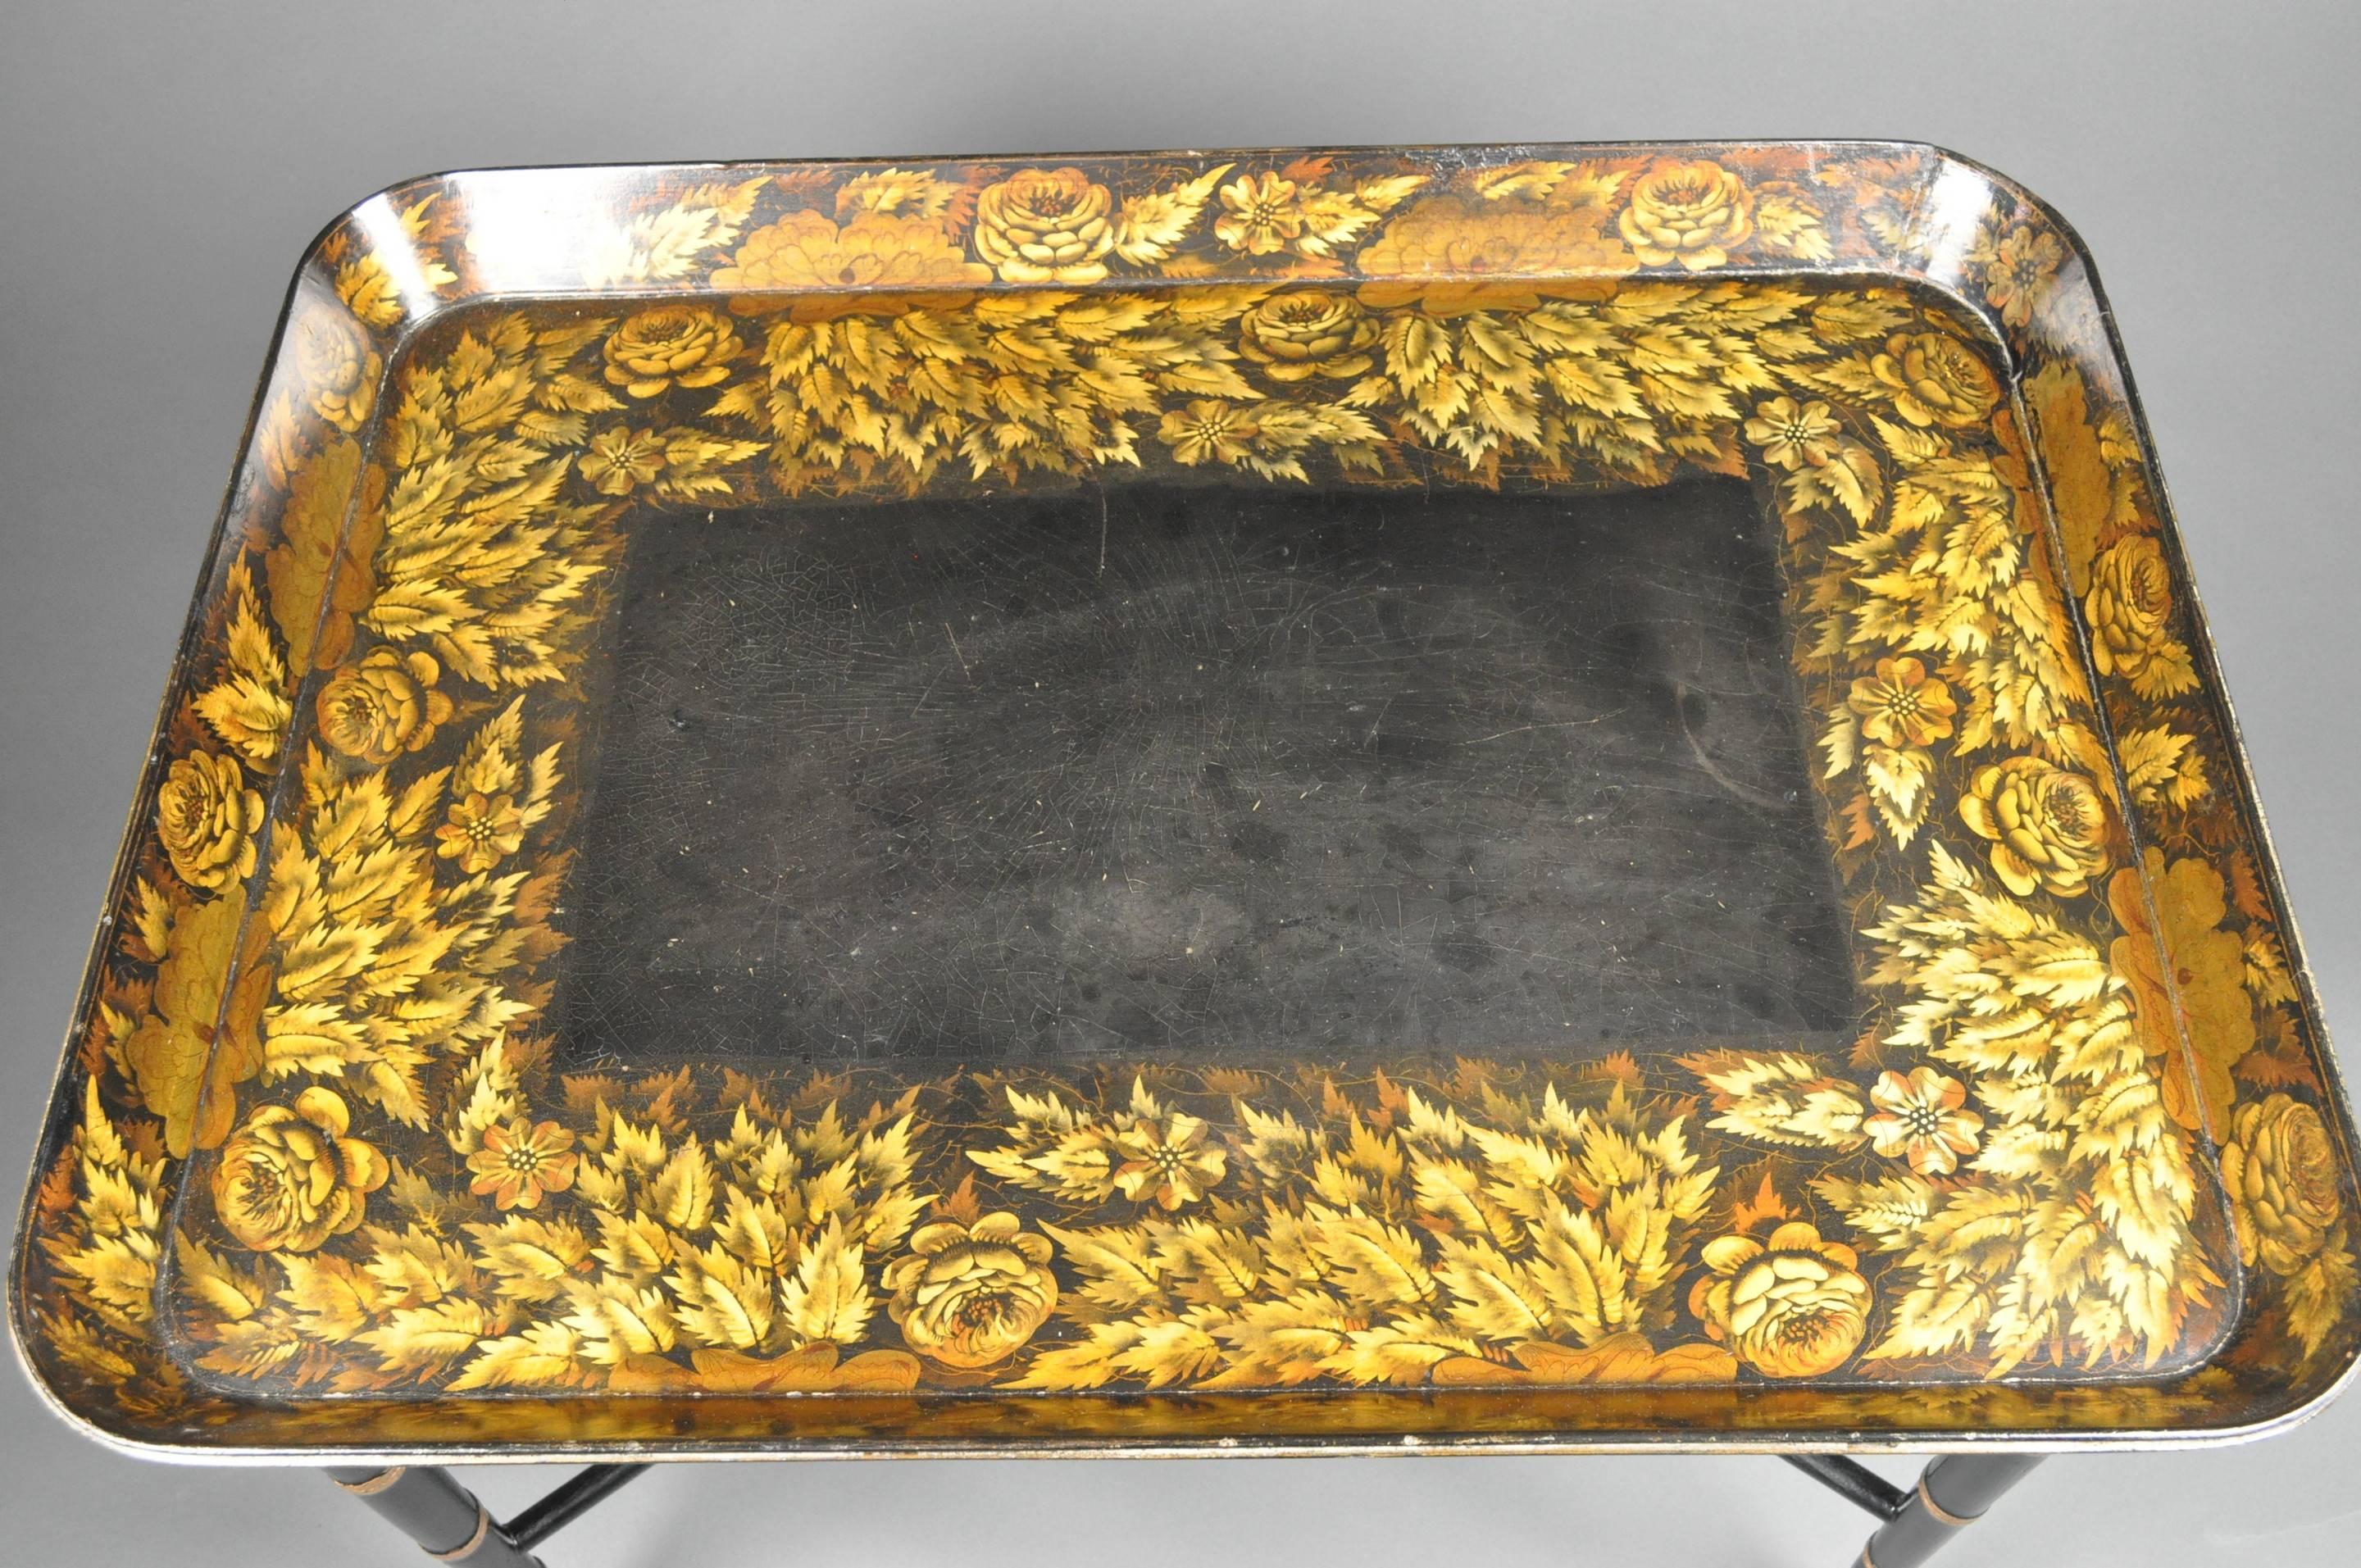 A fine quality early 19th century large black Papier Mâché tray, the wide borders and gallery decorated with hand-painted fern leaves and flower-heads. Signed underneath ‘CLAY, KING ST, COVT GARDEN’. Mounted on a modern stand.